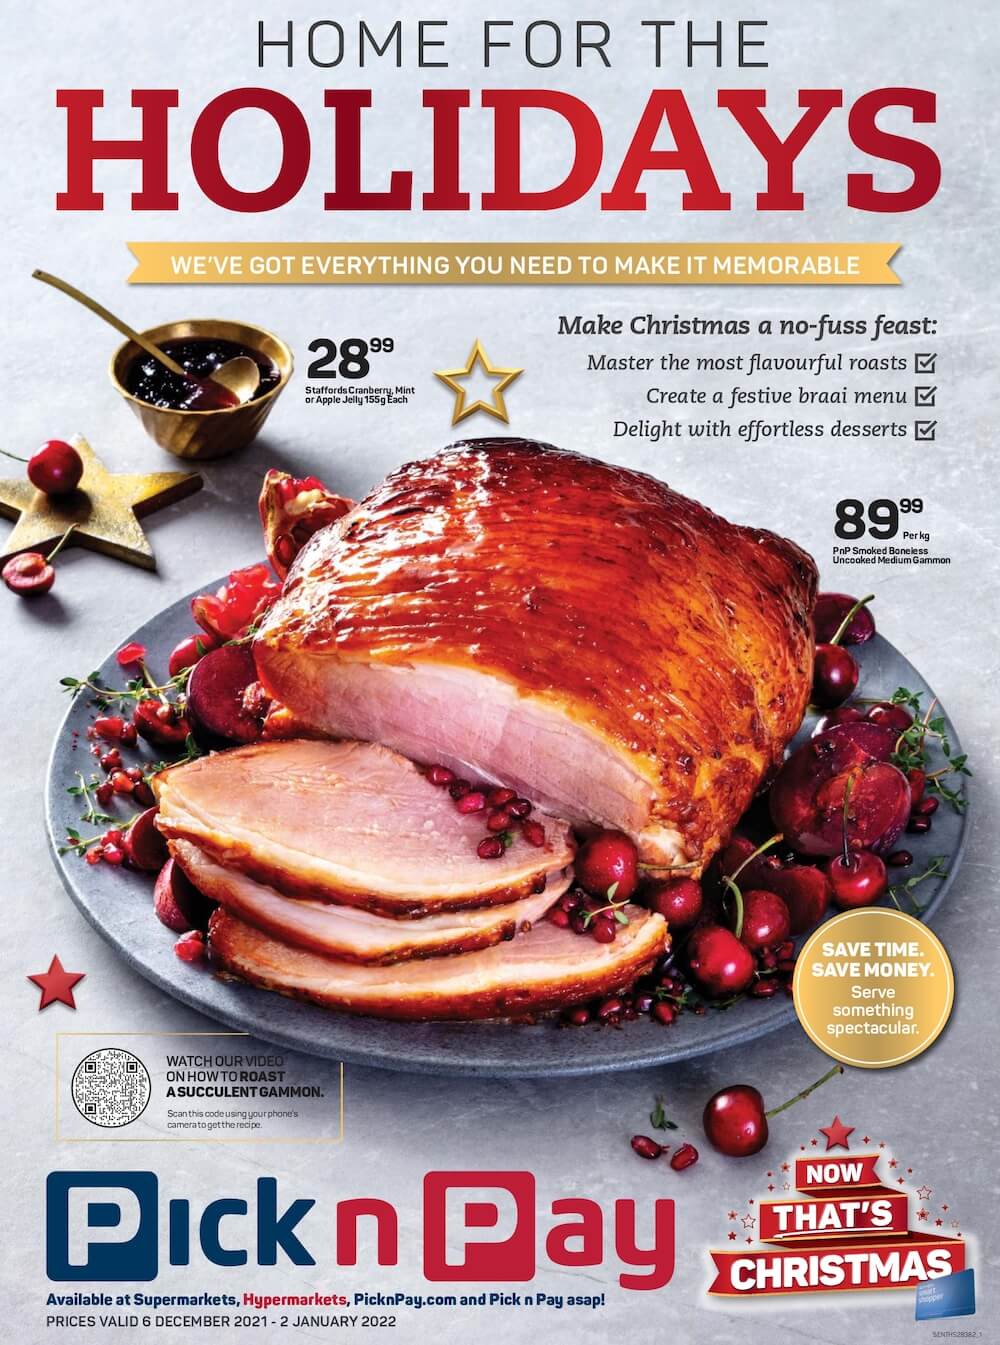 Pick n Pay Specials Christmas Feasting 2021